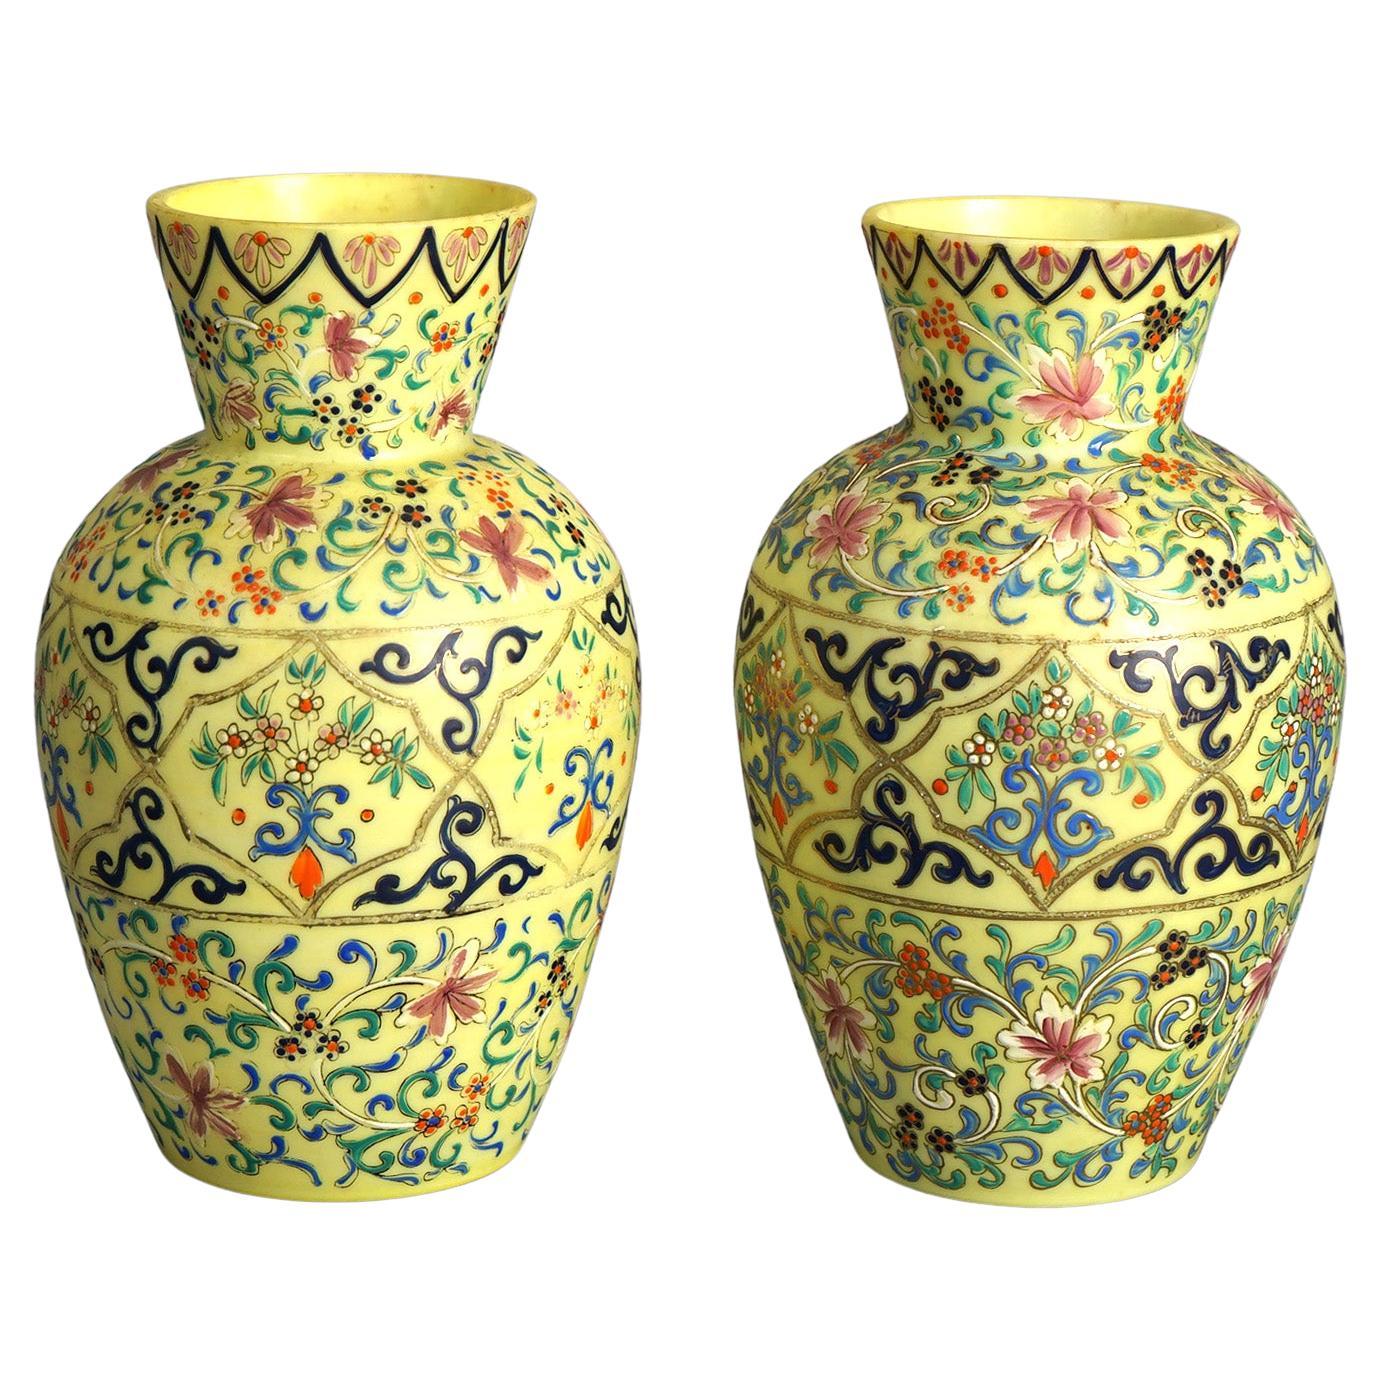 Antique Pair Opaline Enamel Decorated Art Glass Vases with Floral & Scroll C1900 For Sale